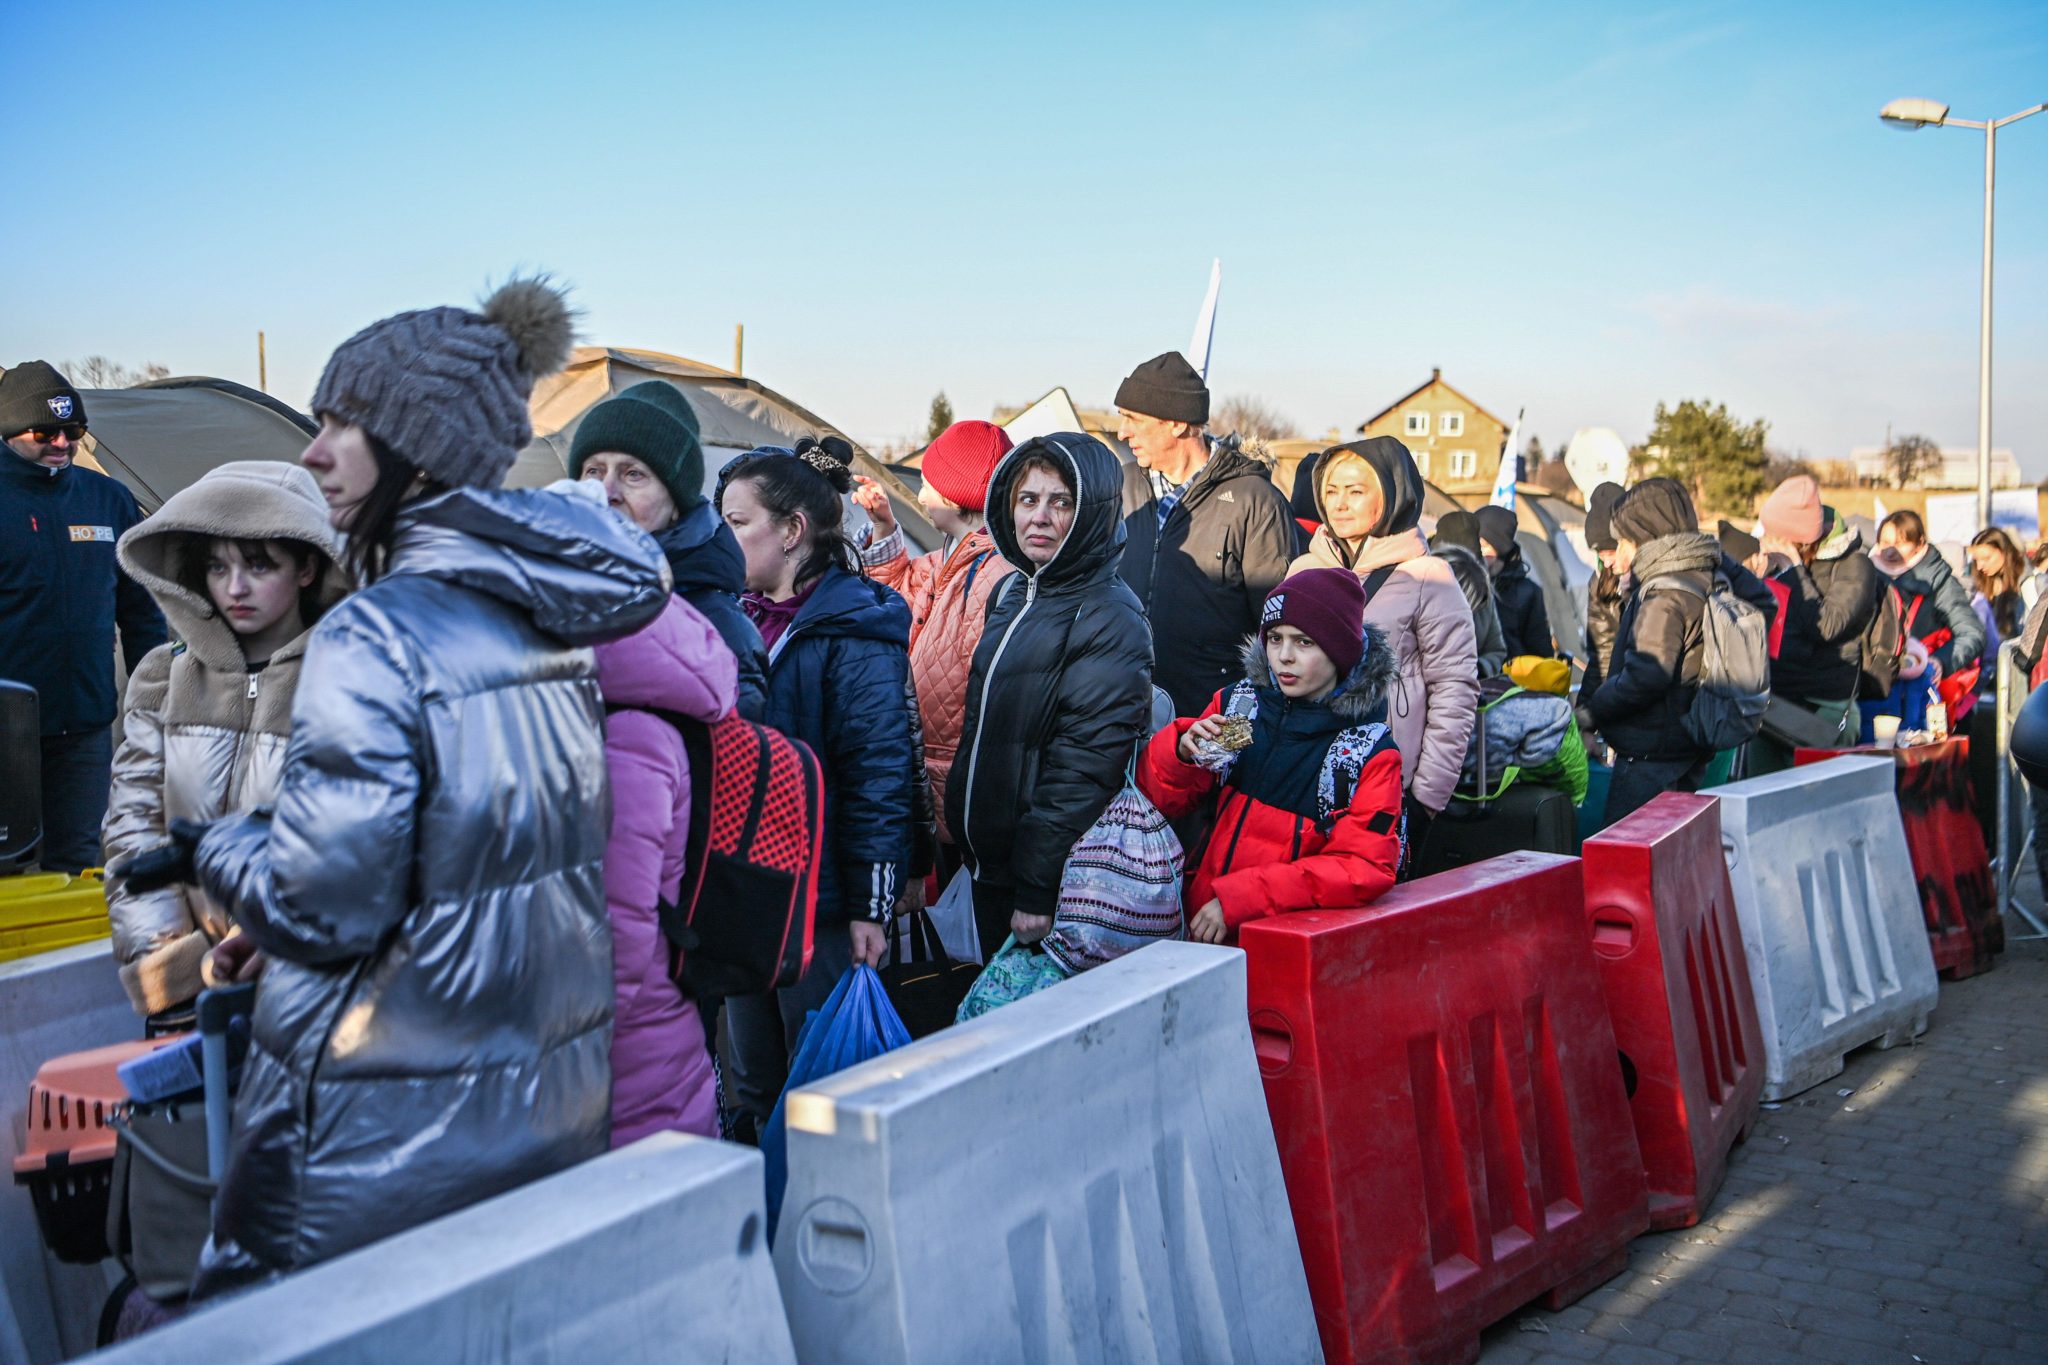 Ukrainian refugees wait to board busses at the Medyka border crossing in Poland on March 11th, 2022.